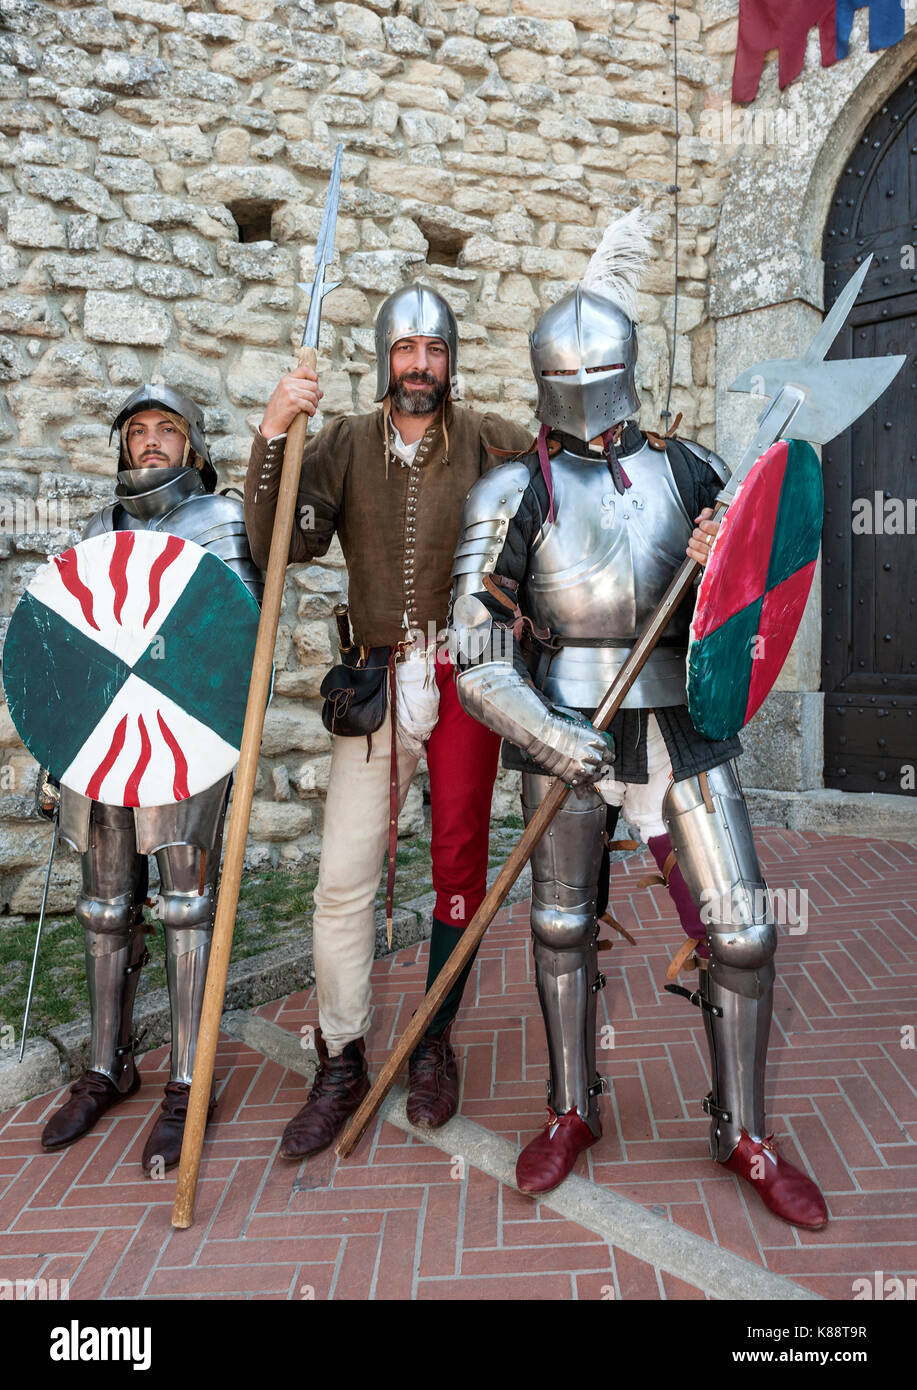 San Marinis dressed and performing in period costumes during the annual Medieval Days Festival held in San Marino. Stock Photo